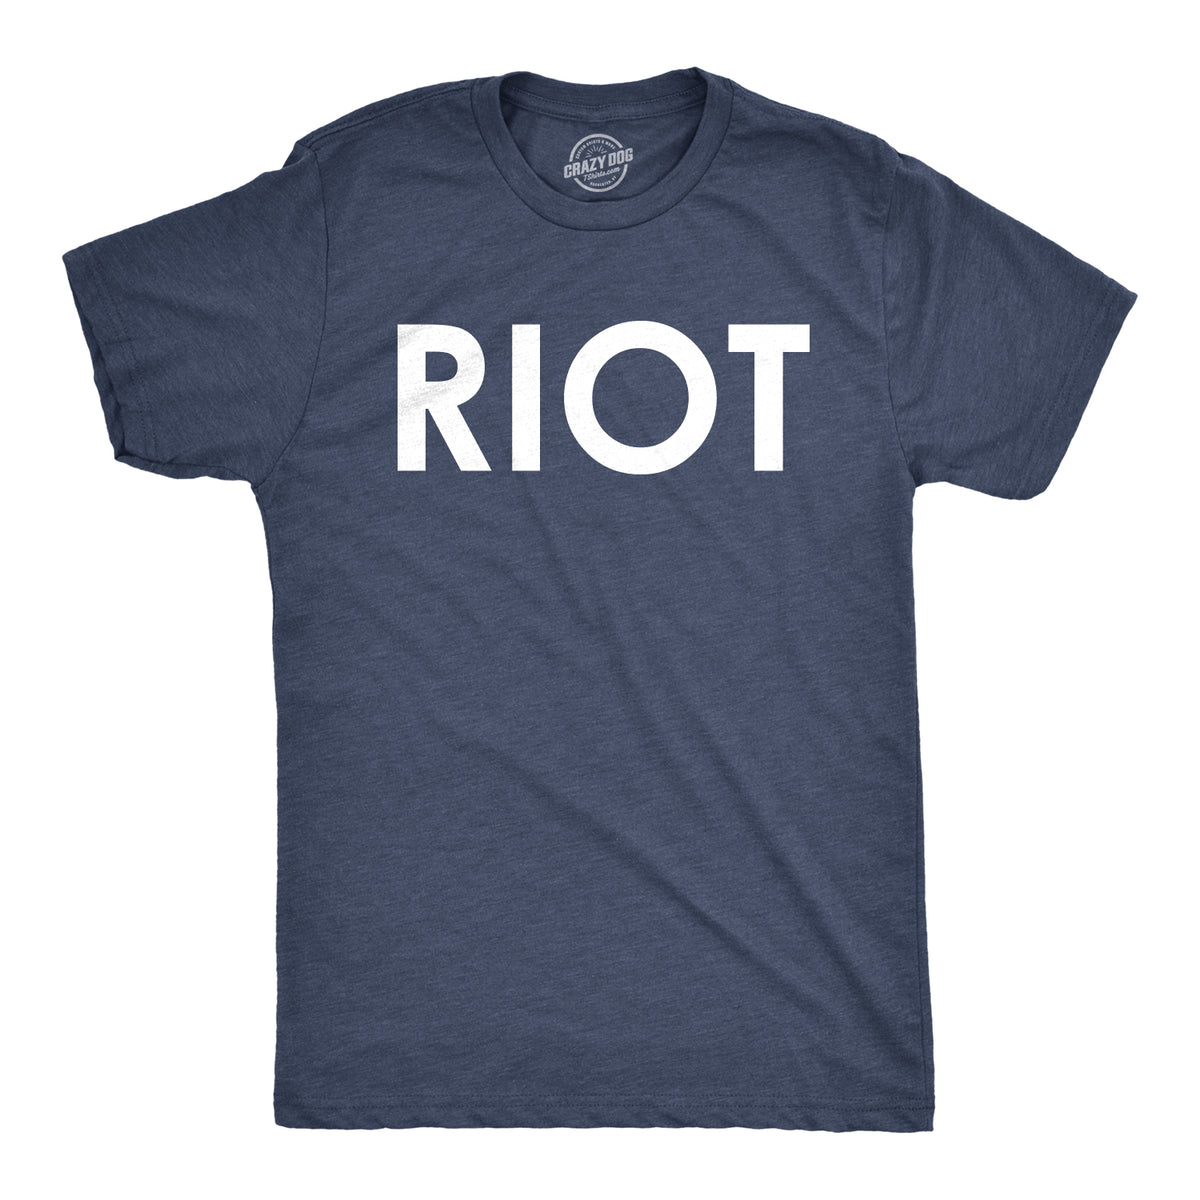 Funny Heather Navy Riot Mens T Shirt Nerdy Political Tee